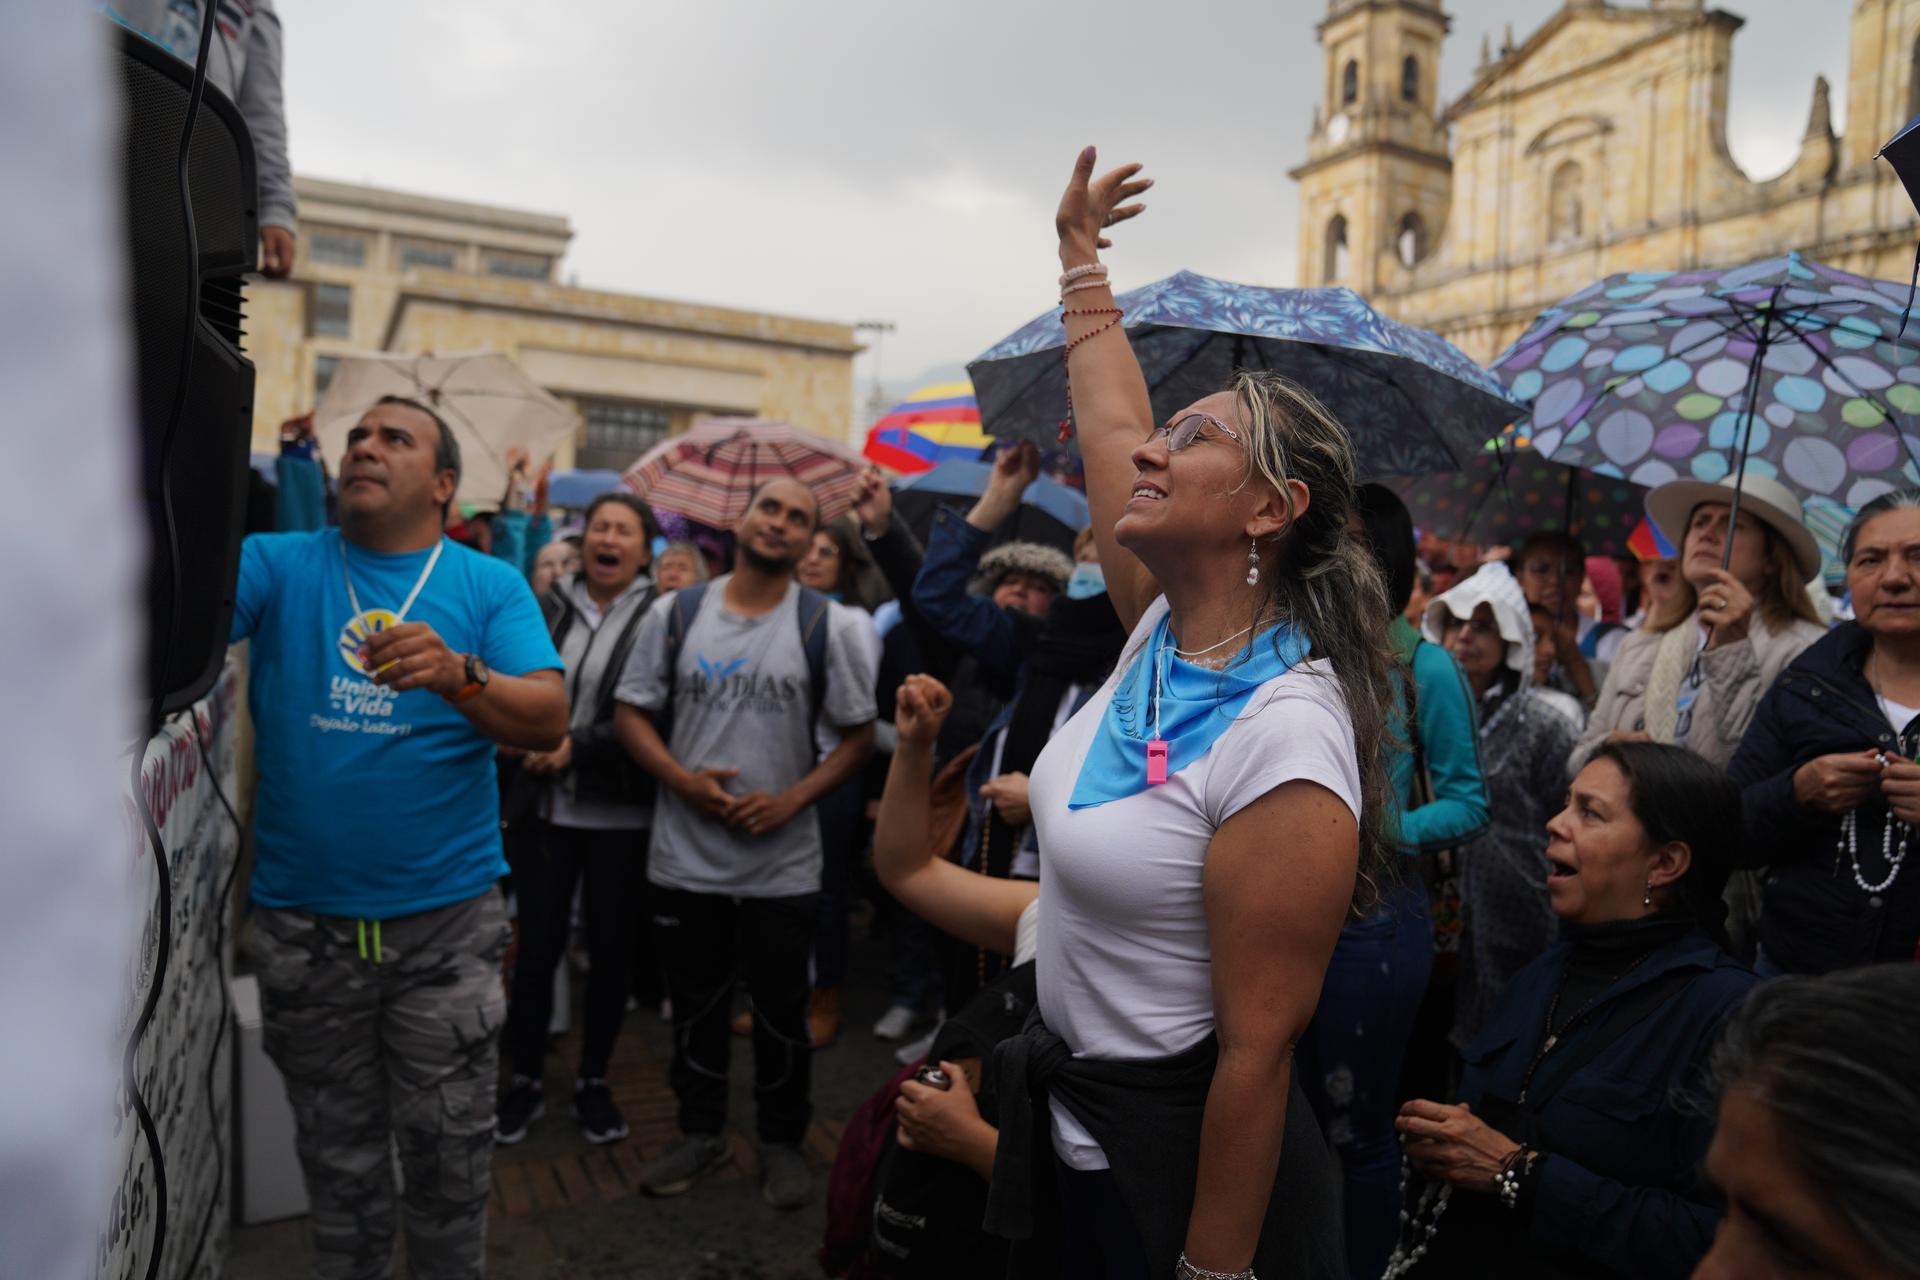 A demonstrator prays during a protest against efforts to liberalize abortion outside a cathedral in Bogotá, Colombia, Feb. 22, 2020.